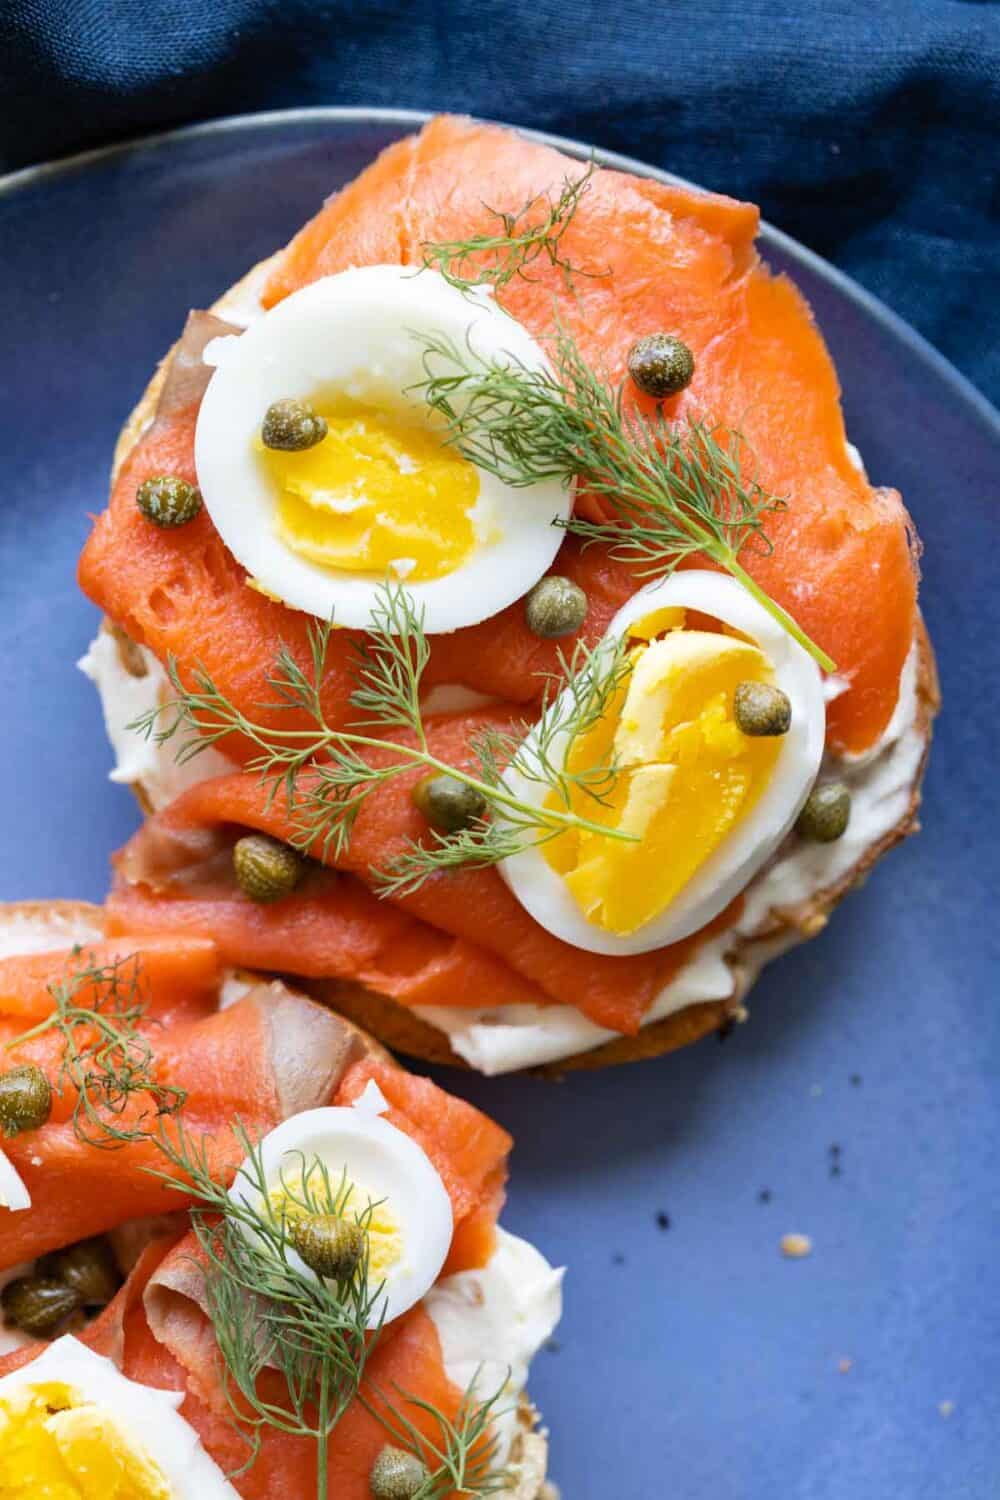 Salmon Bagel with hard-boiled egg, dill, and capers on top.